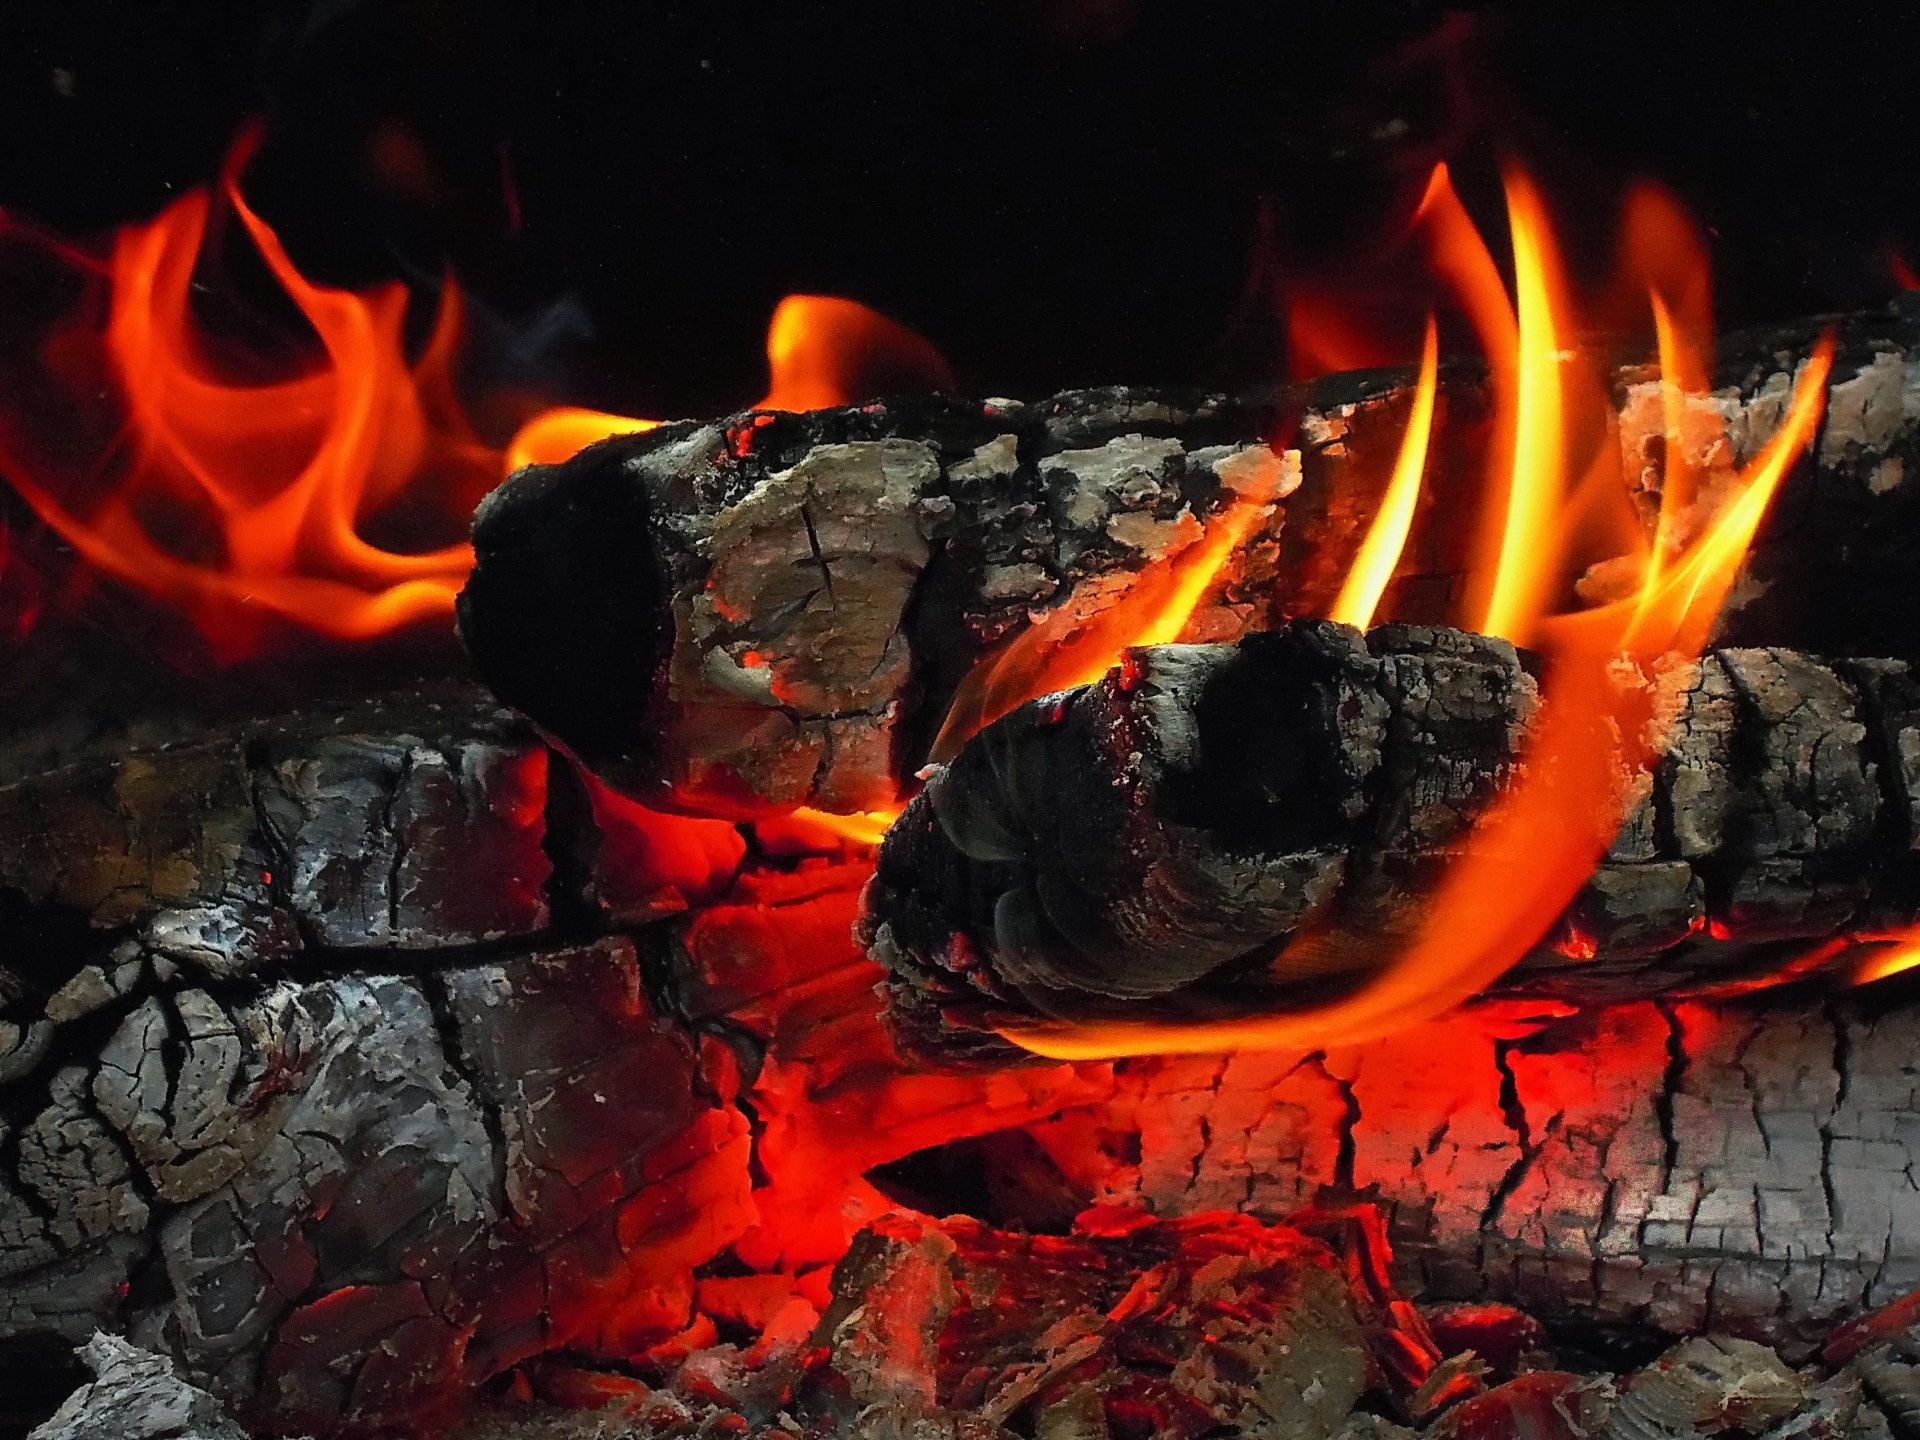 Fireplace: Flame, The hot, glowing mixture of burning gases and tiny particles that arises from combustion. 1920x1440 HD Background.